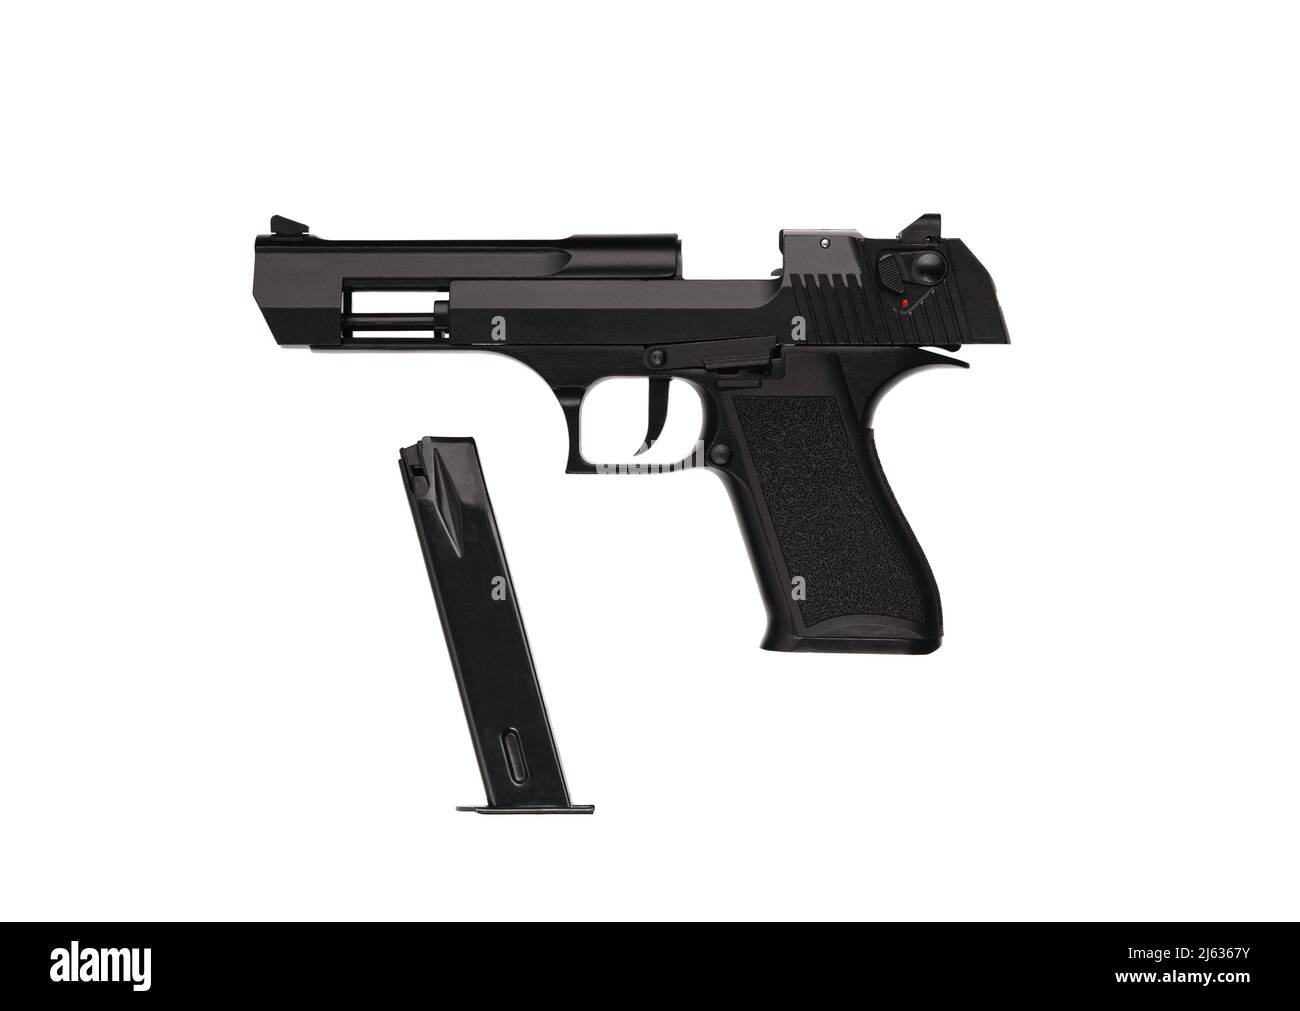 Modern semi-automatic pistol. A short-barreled weapon for self-defense. Arming the police, special units and the army. Isolate on a white background. Stock Photo